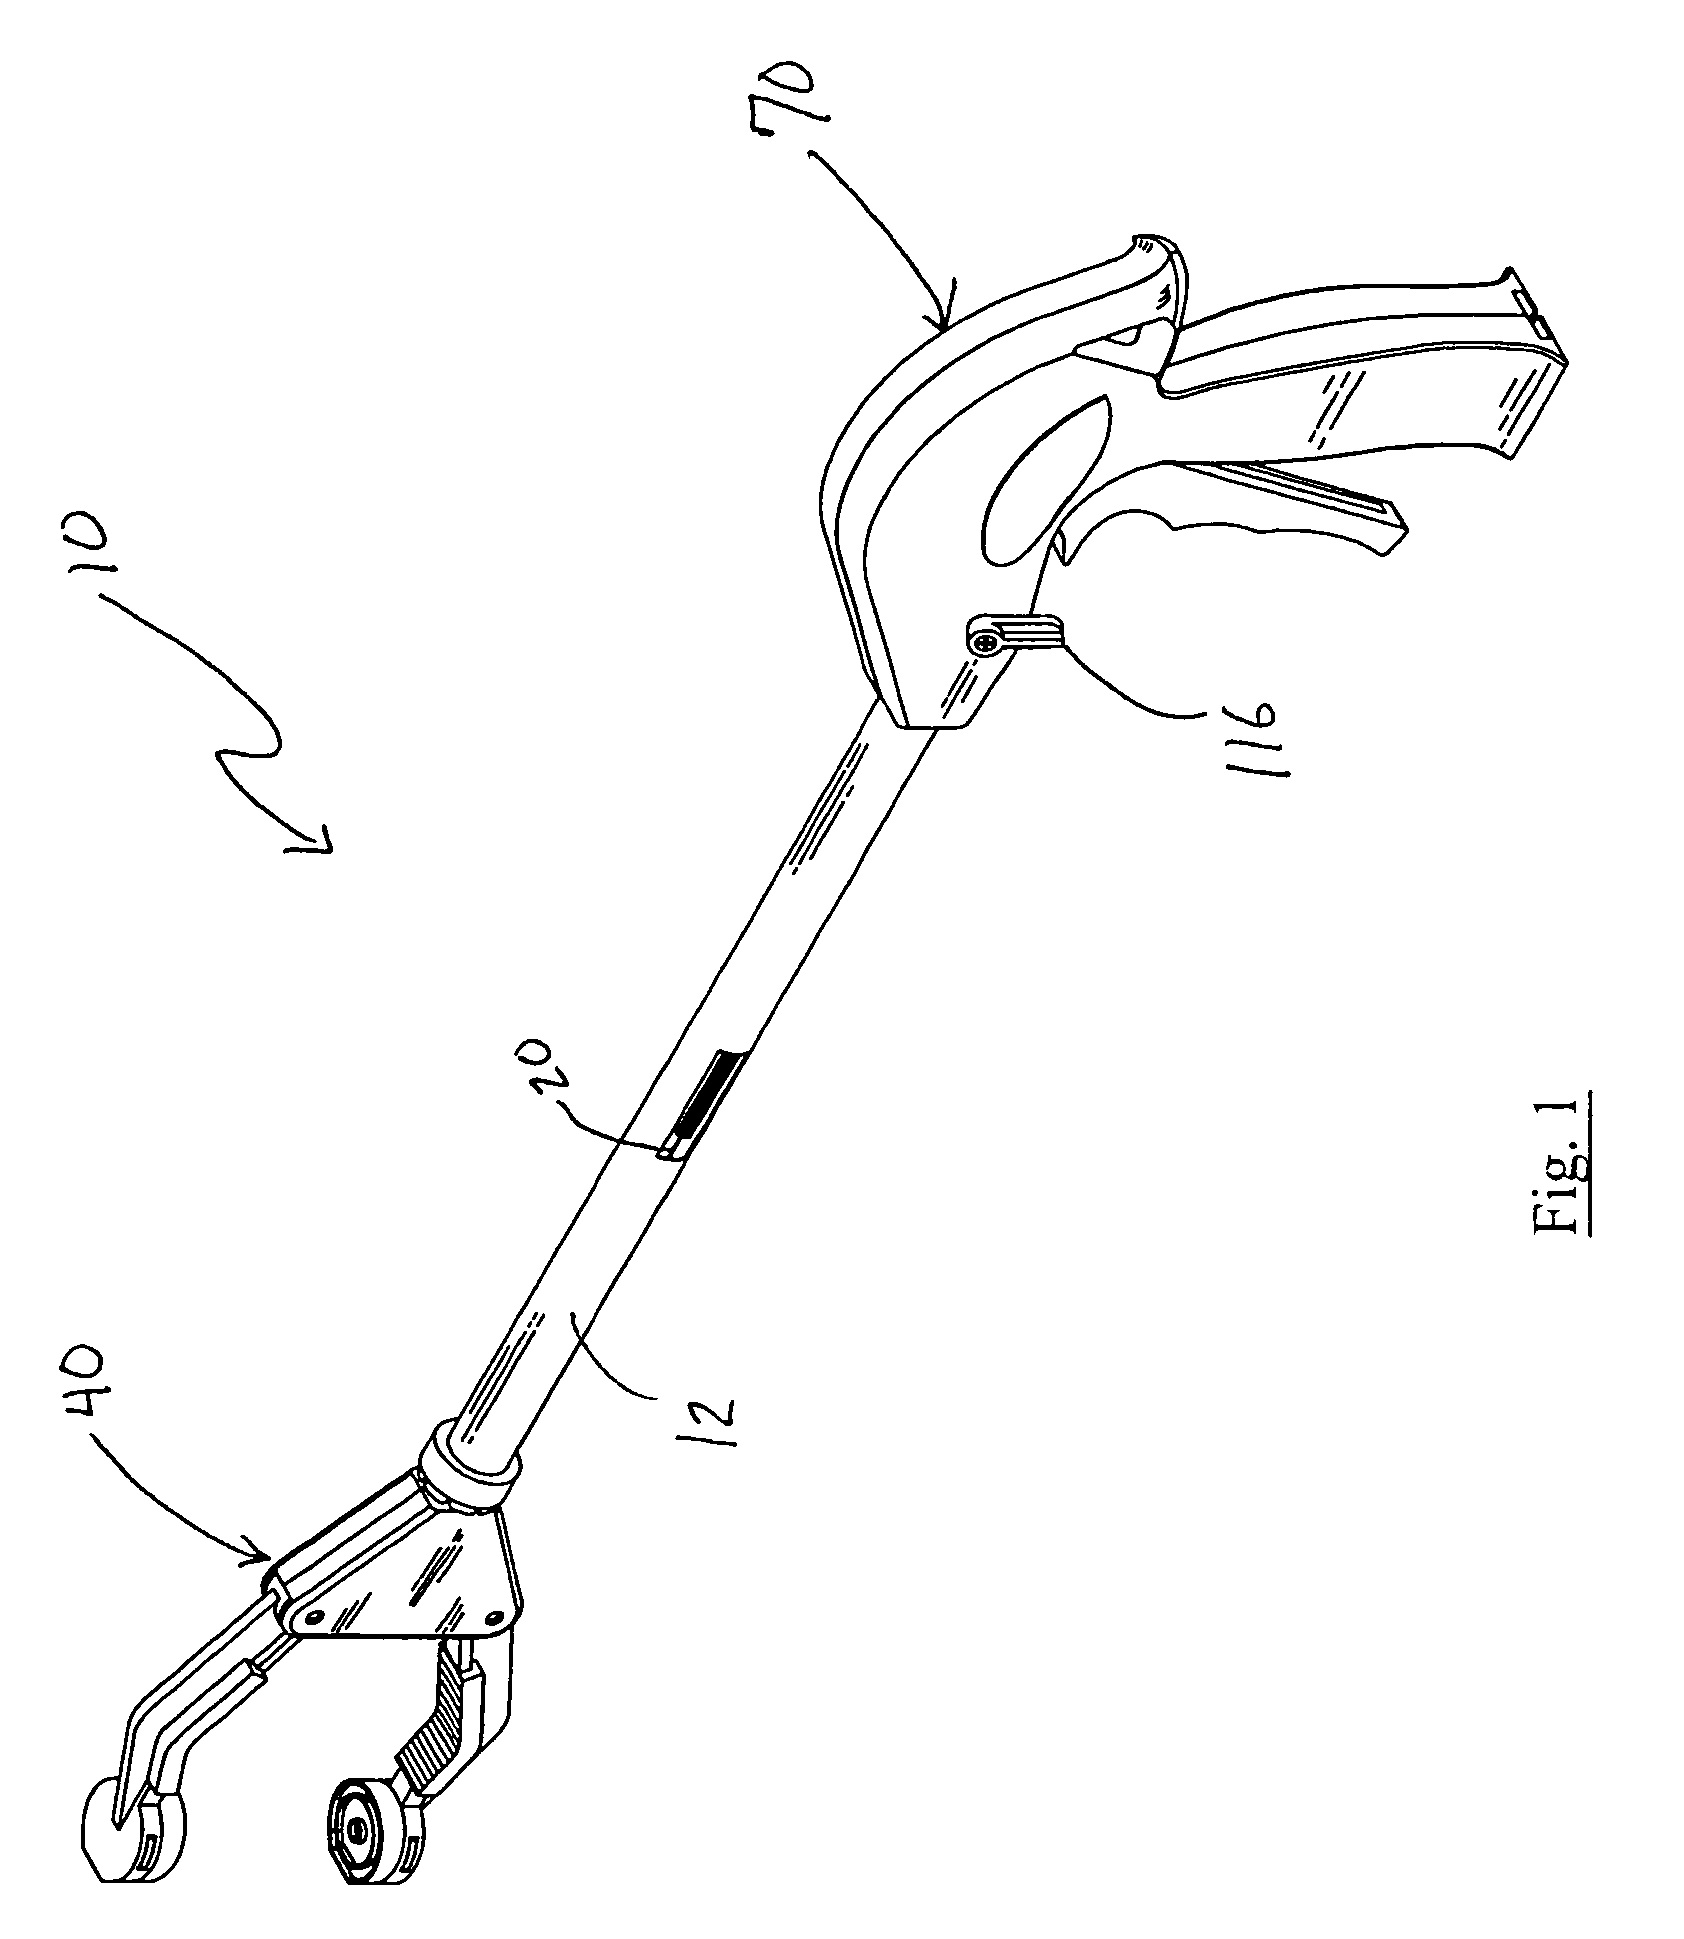 Hand-held device for picking up objects